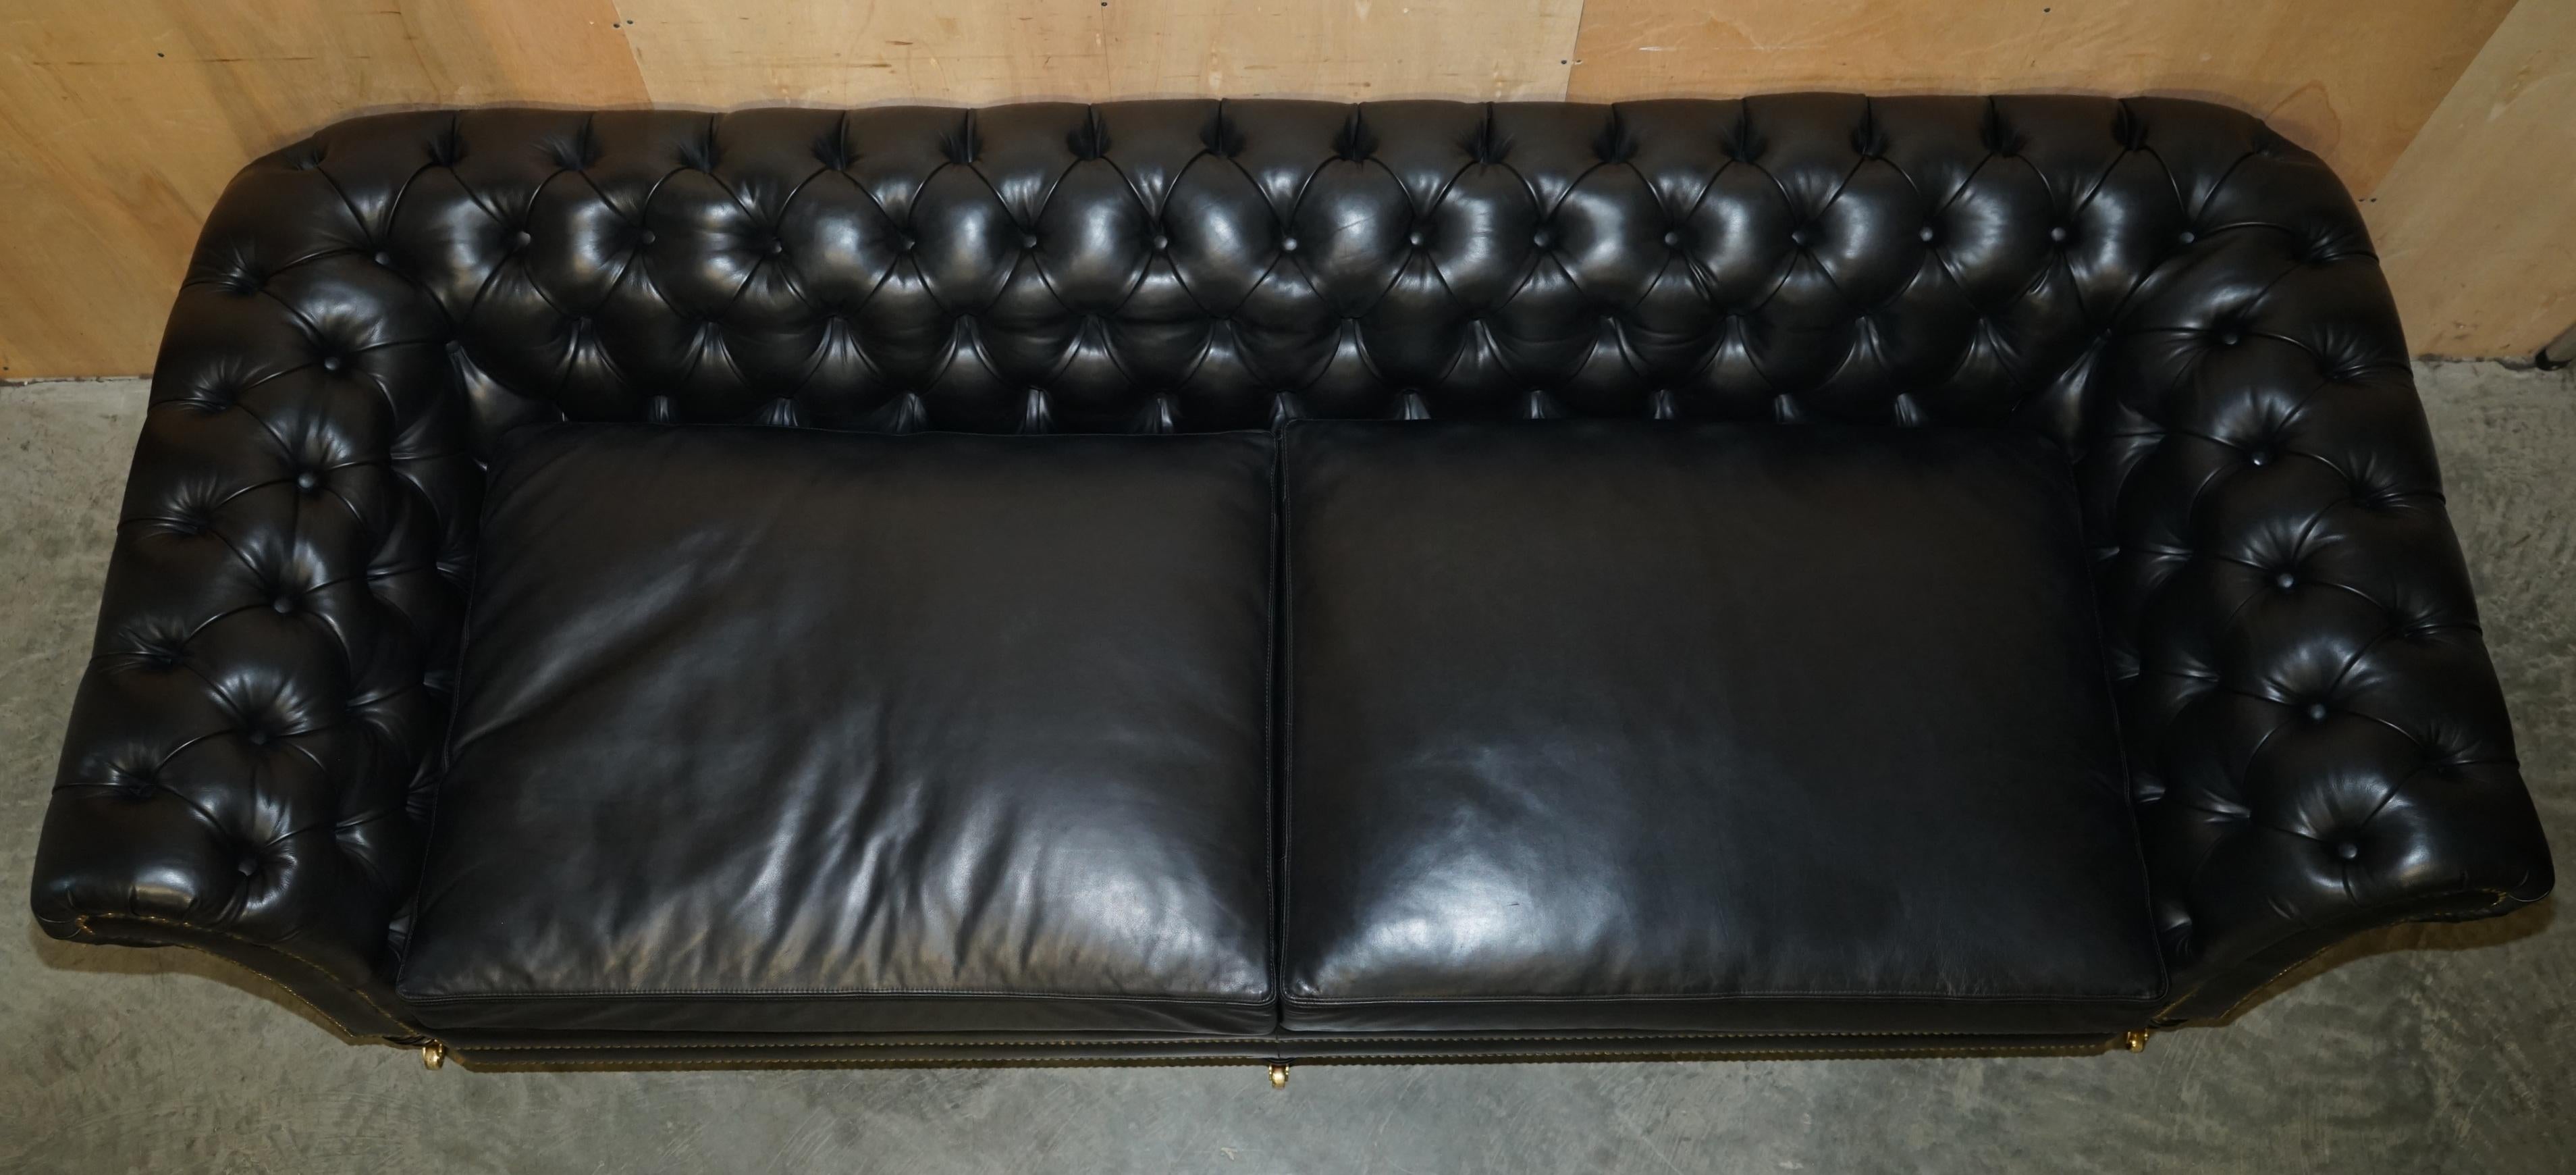 EXQUISITE PAIR OF RALPH LAUREN BROOK STREET BLACK LEATHER CHESTERFIELD SOFAs For Sale 9